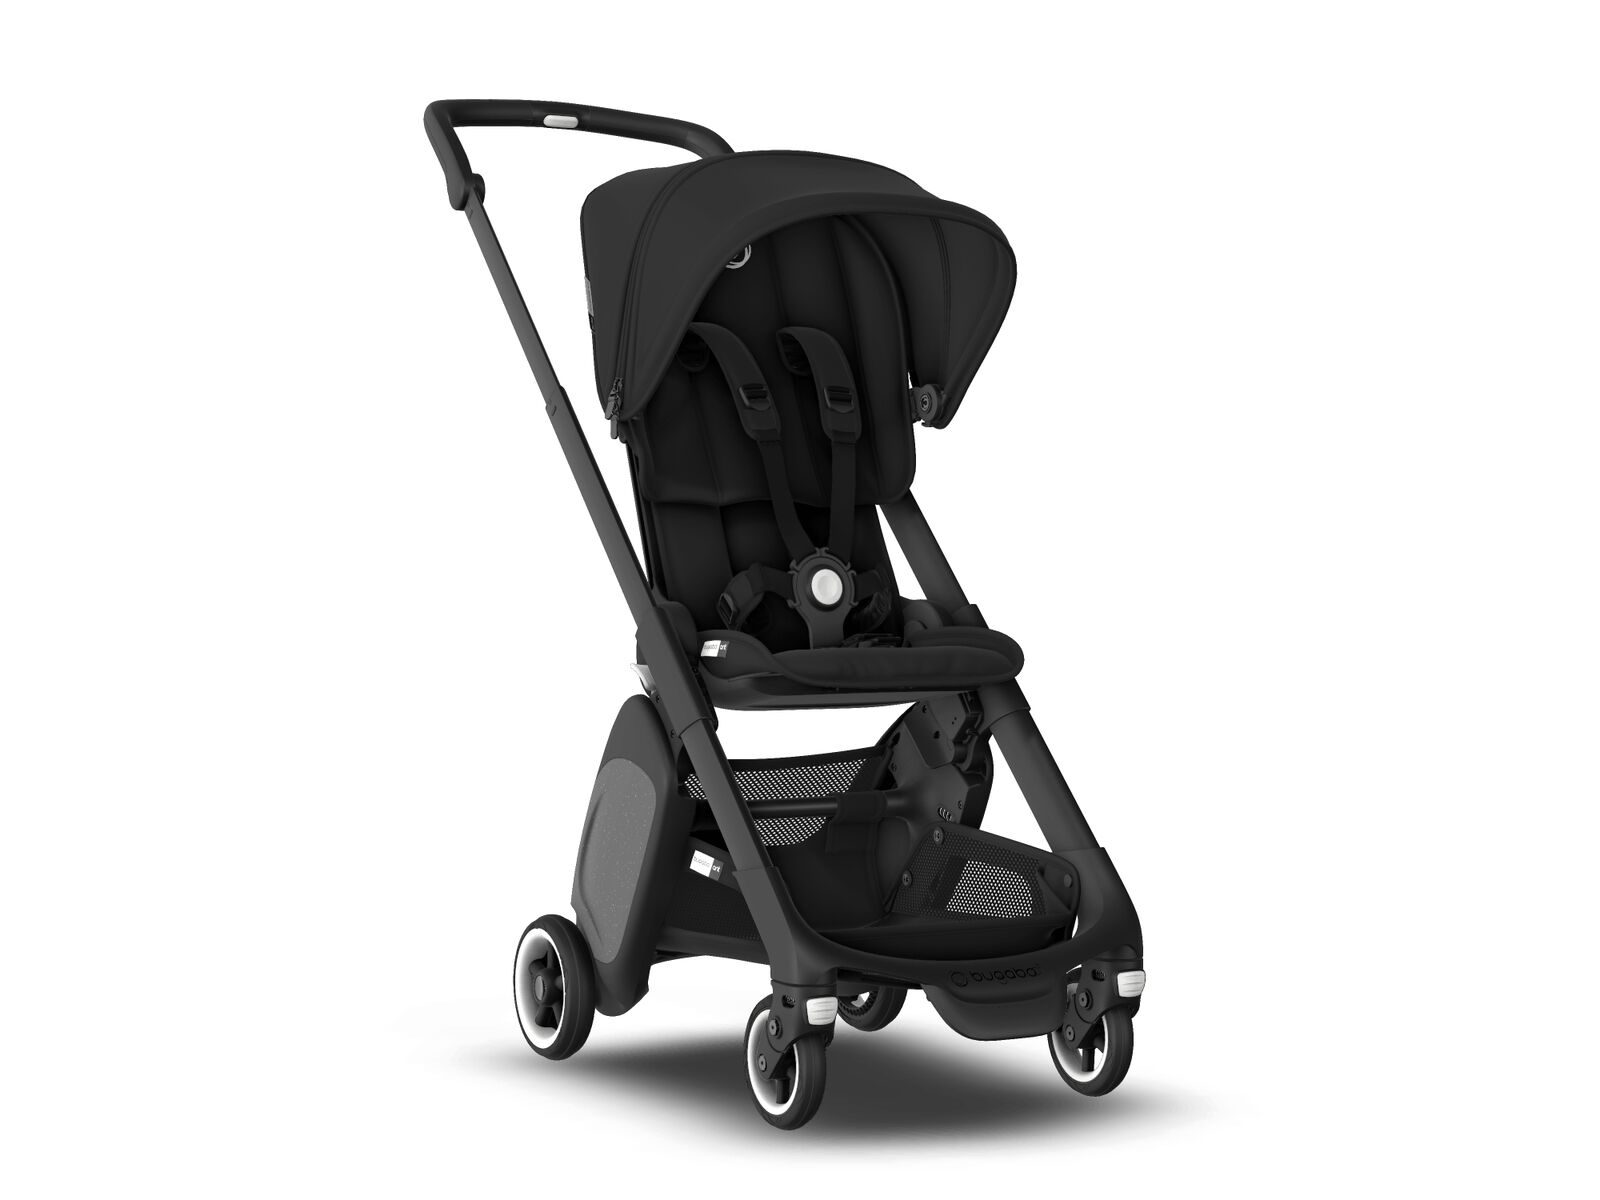 Full stroller look - Bugaboo Ant Review - Baby Journey blog